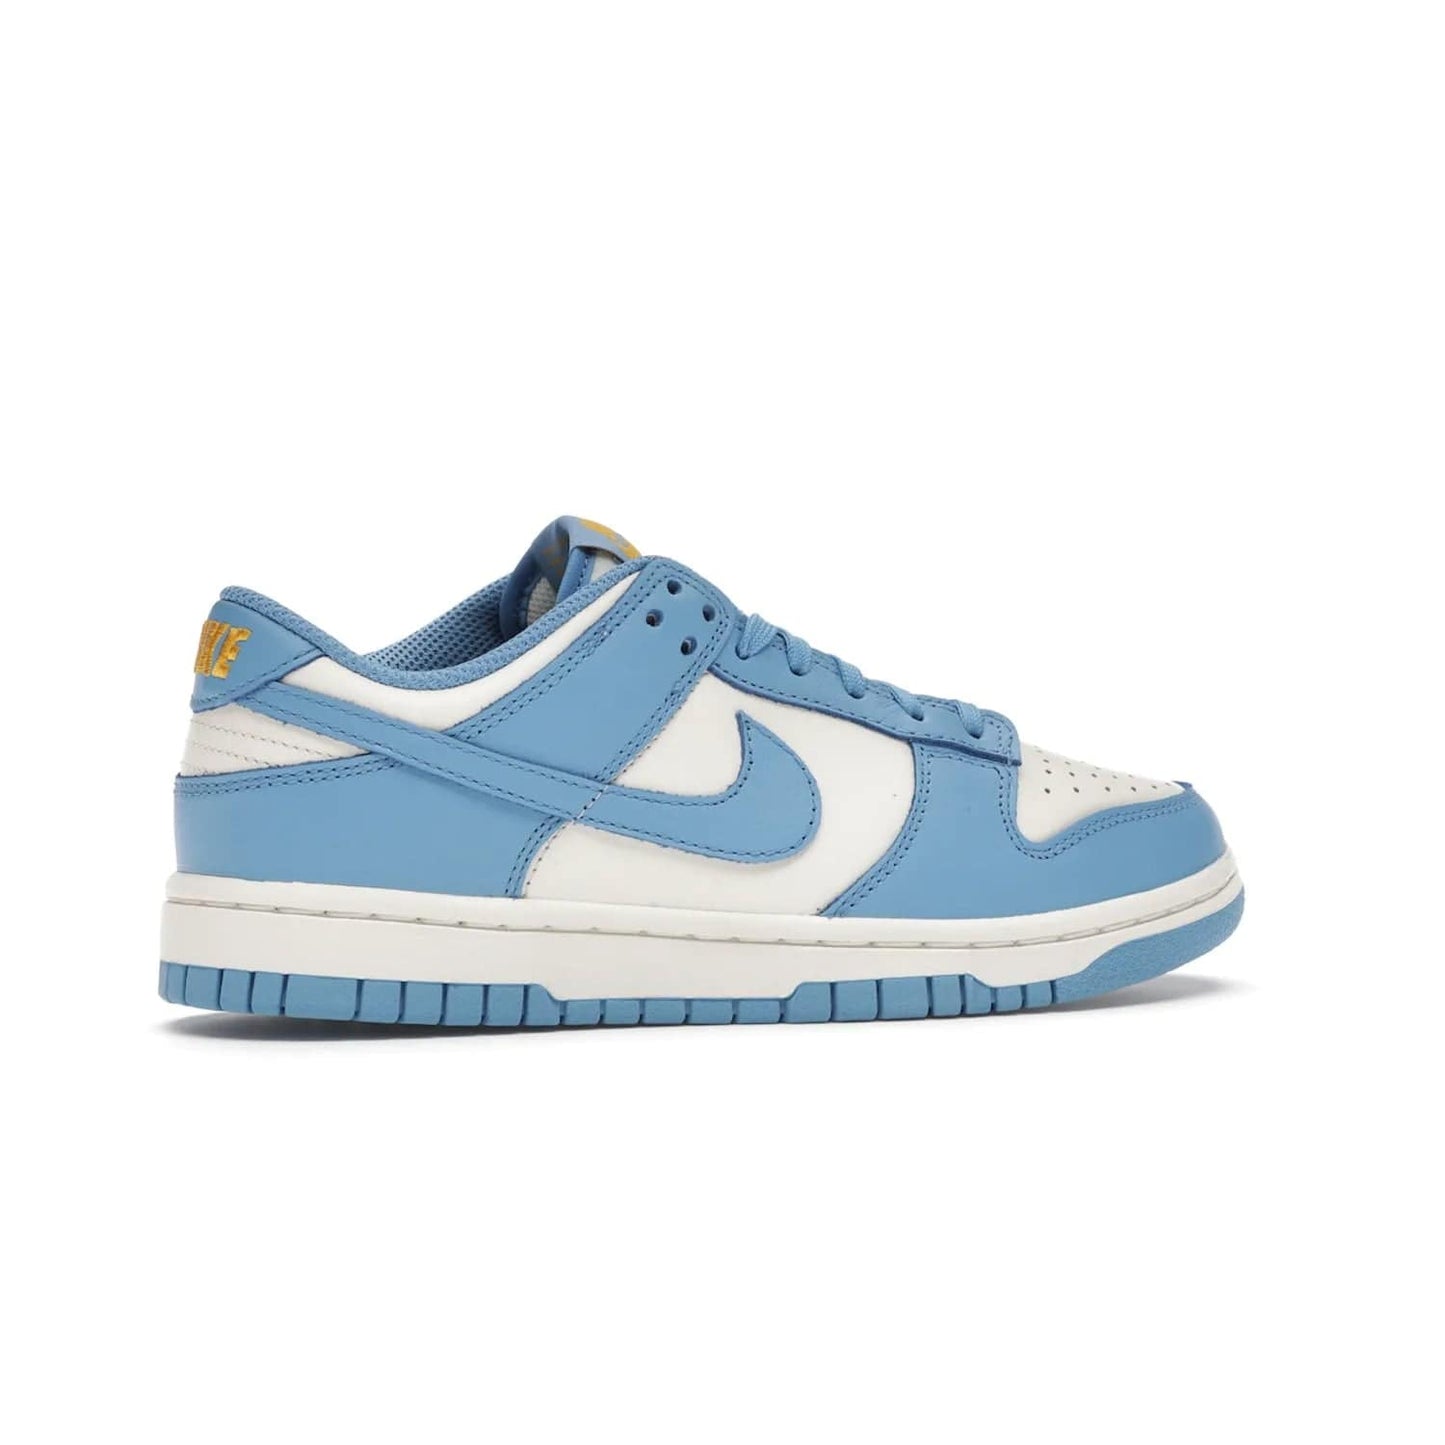 Nike Dunk Low Coast (Women's) - Image 35 - Only at www.BallersClubKickz.com - Iconic UCLA colors honor the west coast with the Nike Dunk Low Coast (Women's), a bold combo of light blue, white and yellow. Light leather upper with white midsole and light EVA outsole offer a modern twist. Released Feb 2021 for $100.